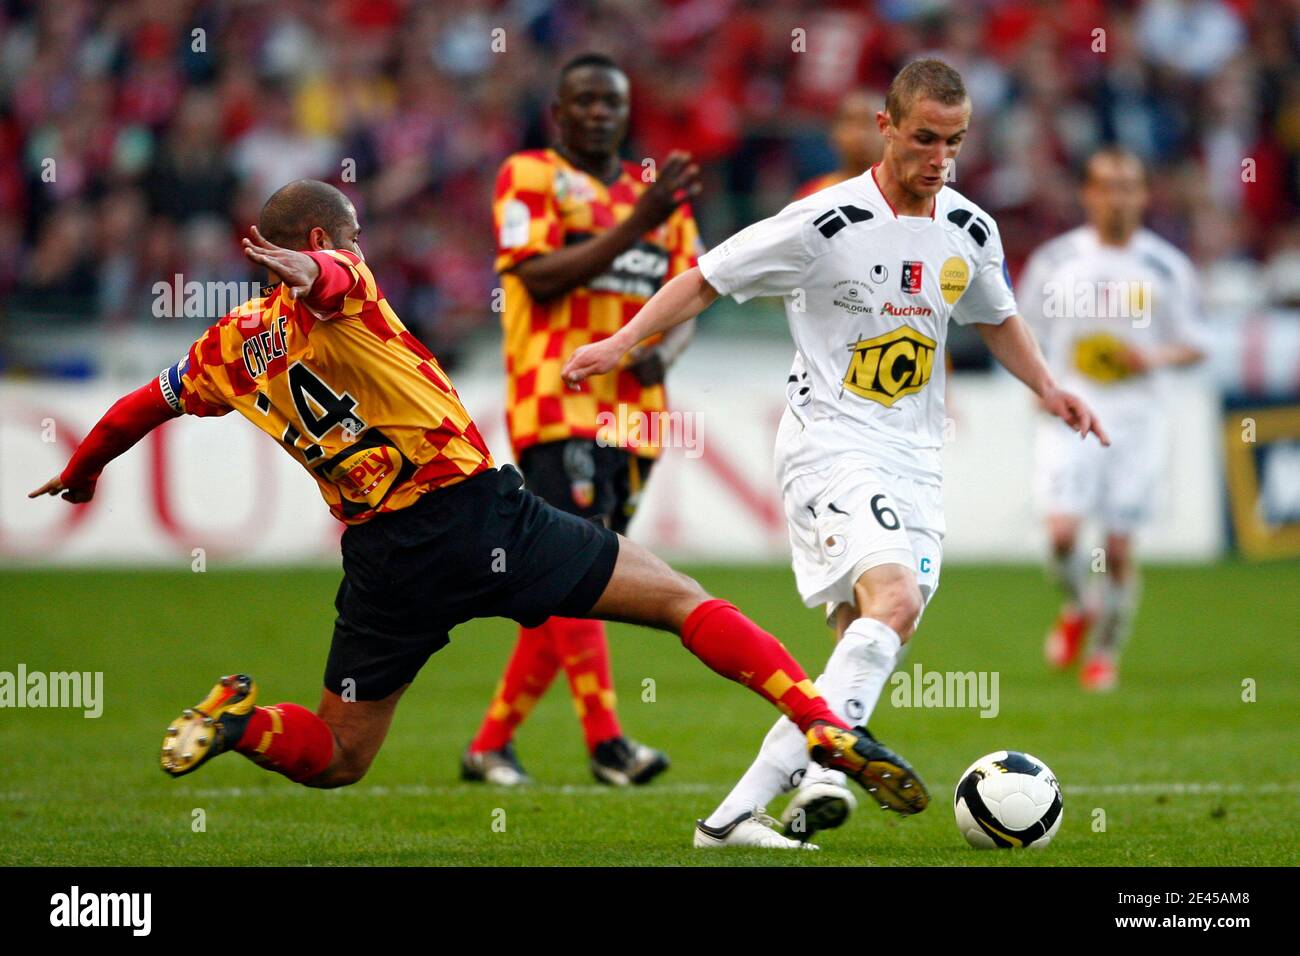 Lens' Eric Chelle fights for the ball with Boulogne's Antoine Devaux during  the French League 2 soccer match between Racing Club de Lens (RCL) and US  Boulogne Cote d'Opale (USBCO) at Felix